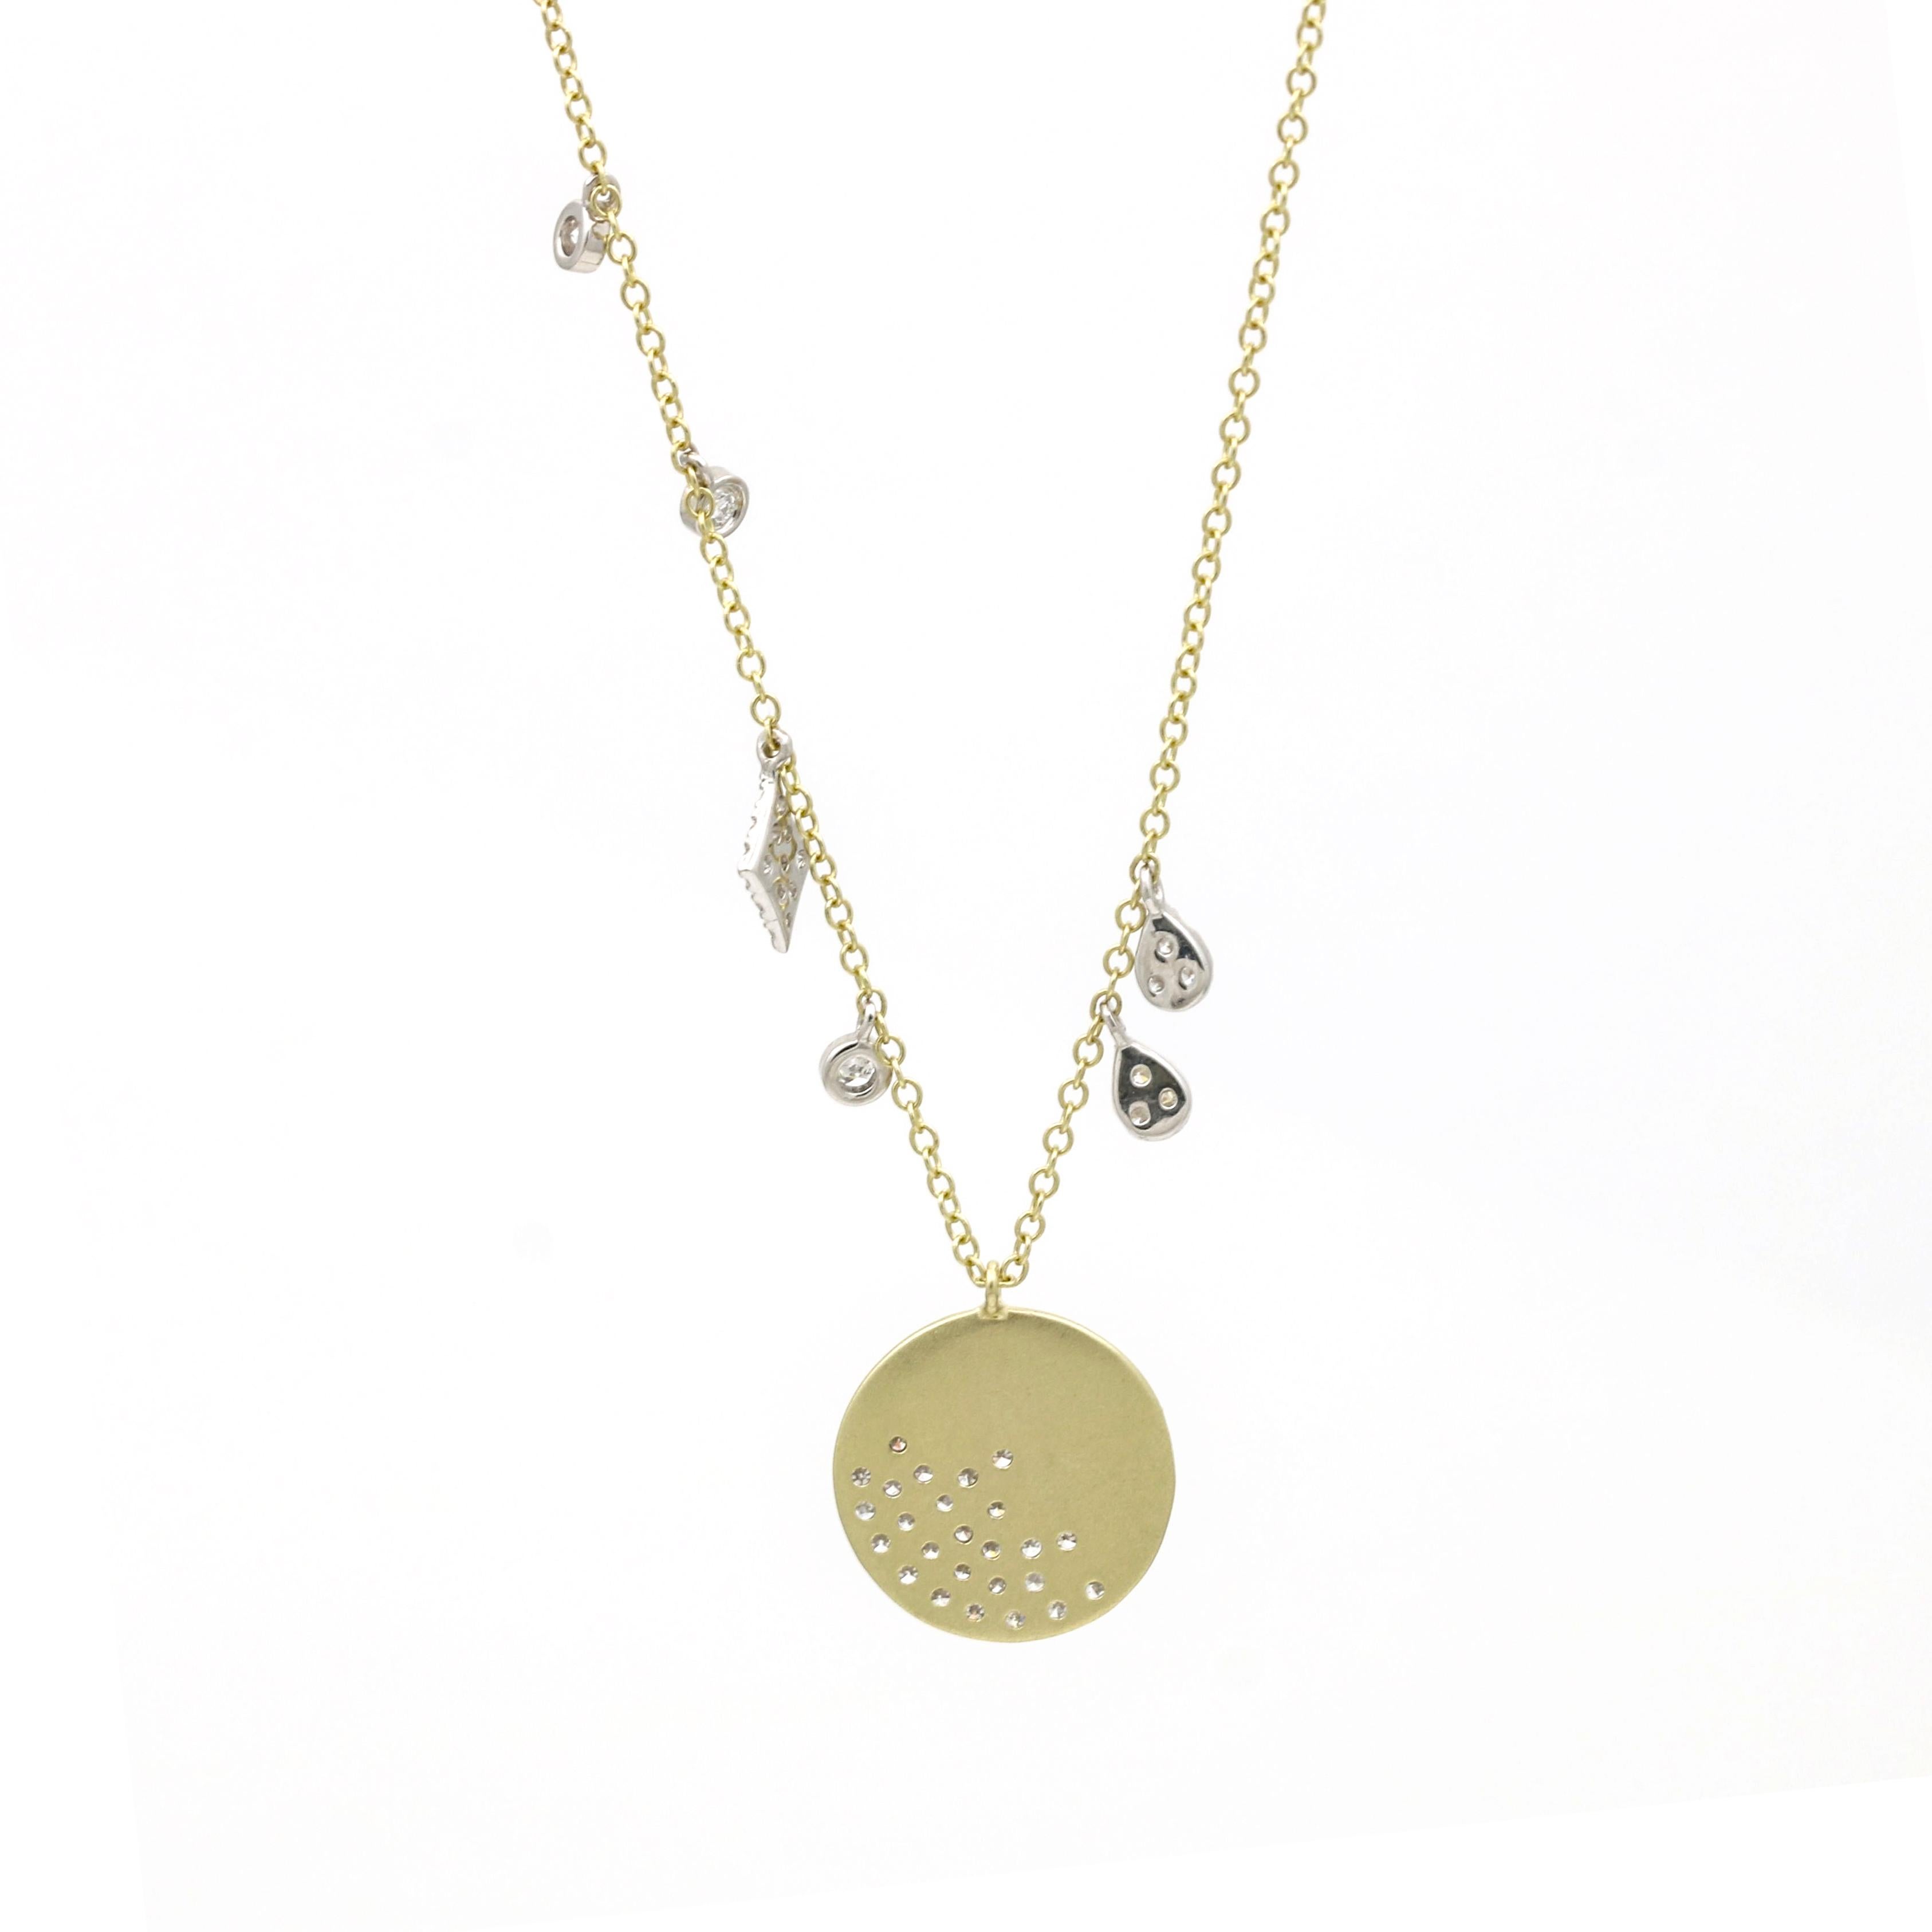 Round Cut Meira T Brushed 14k Gold and Diamonds Necklace with Dangling Charms For Sale